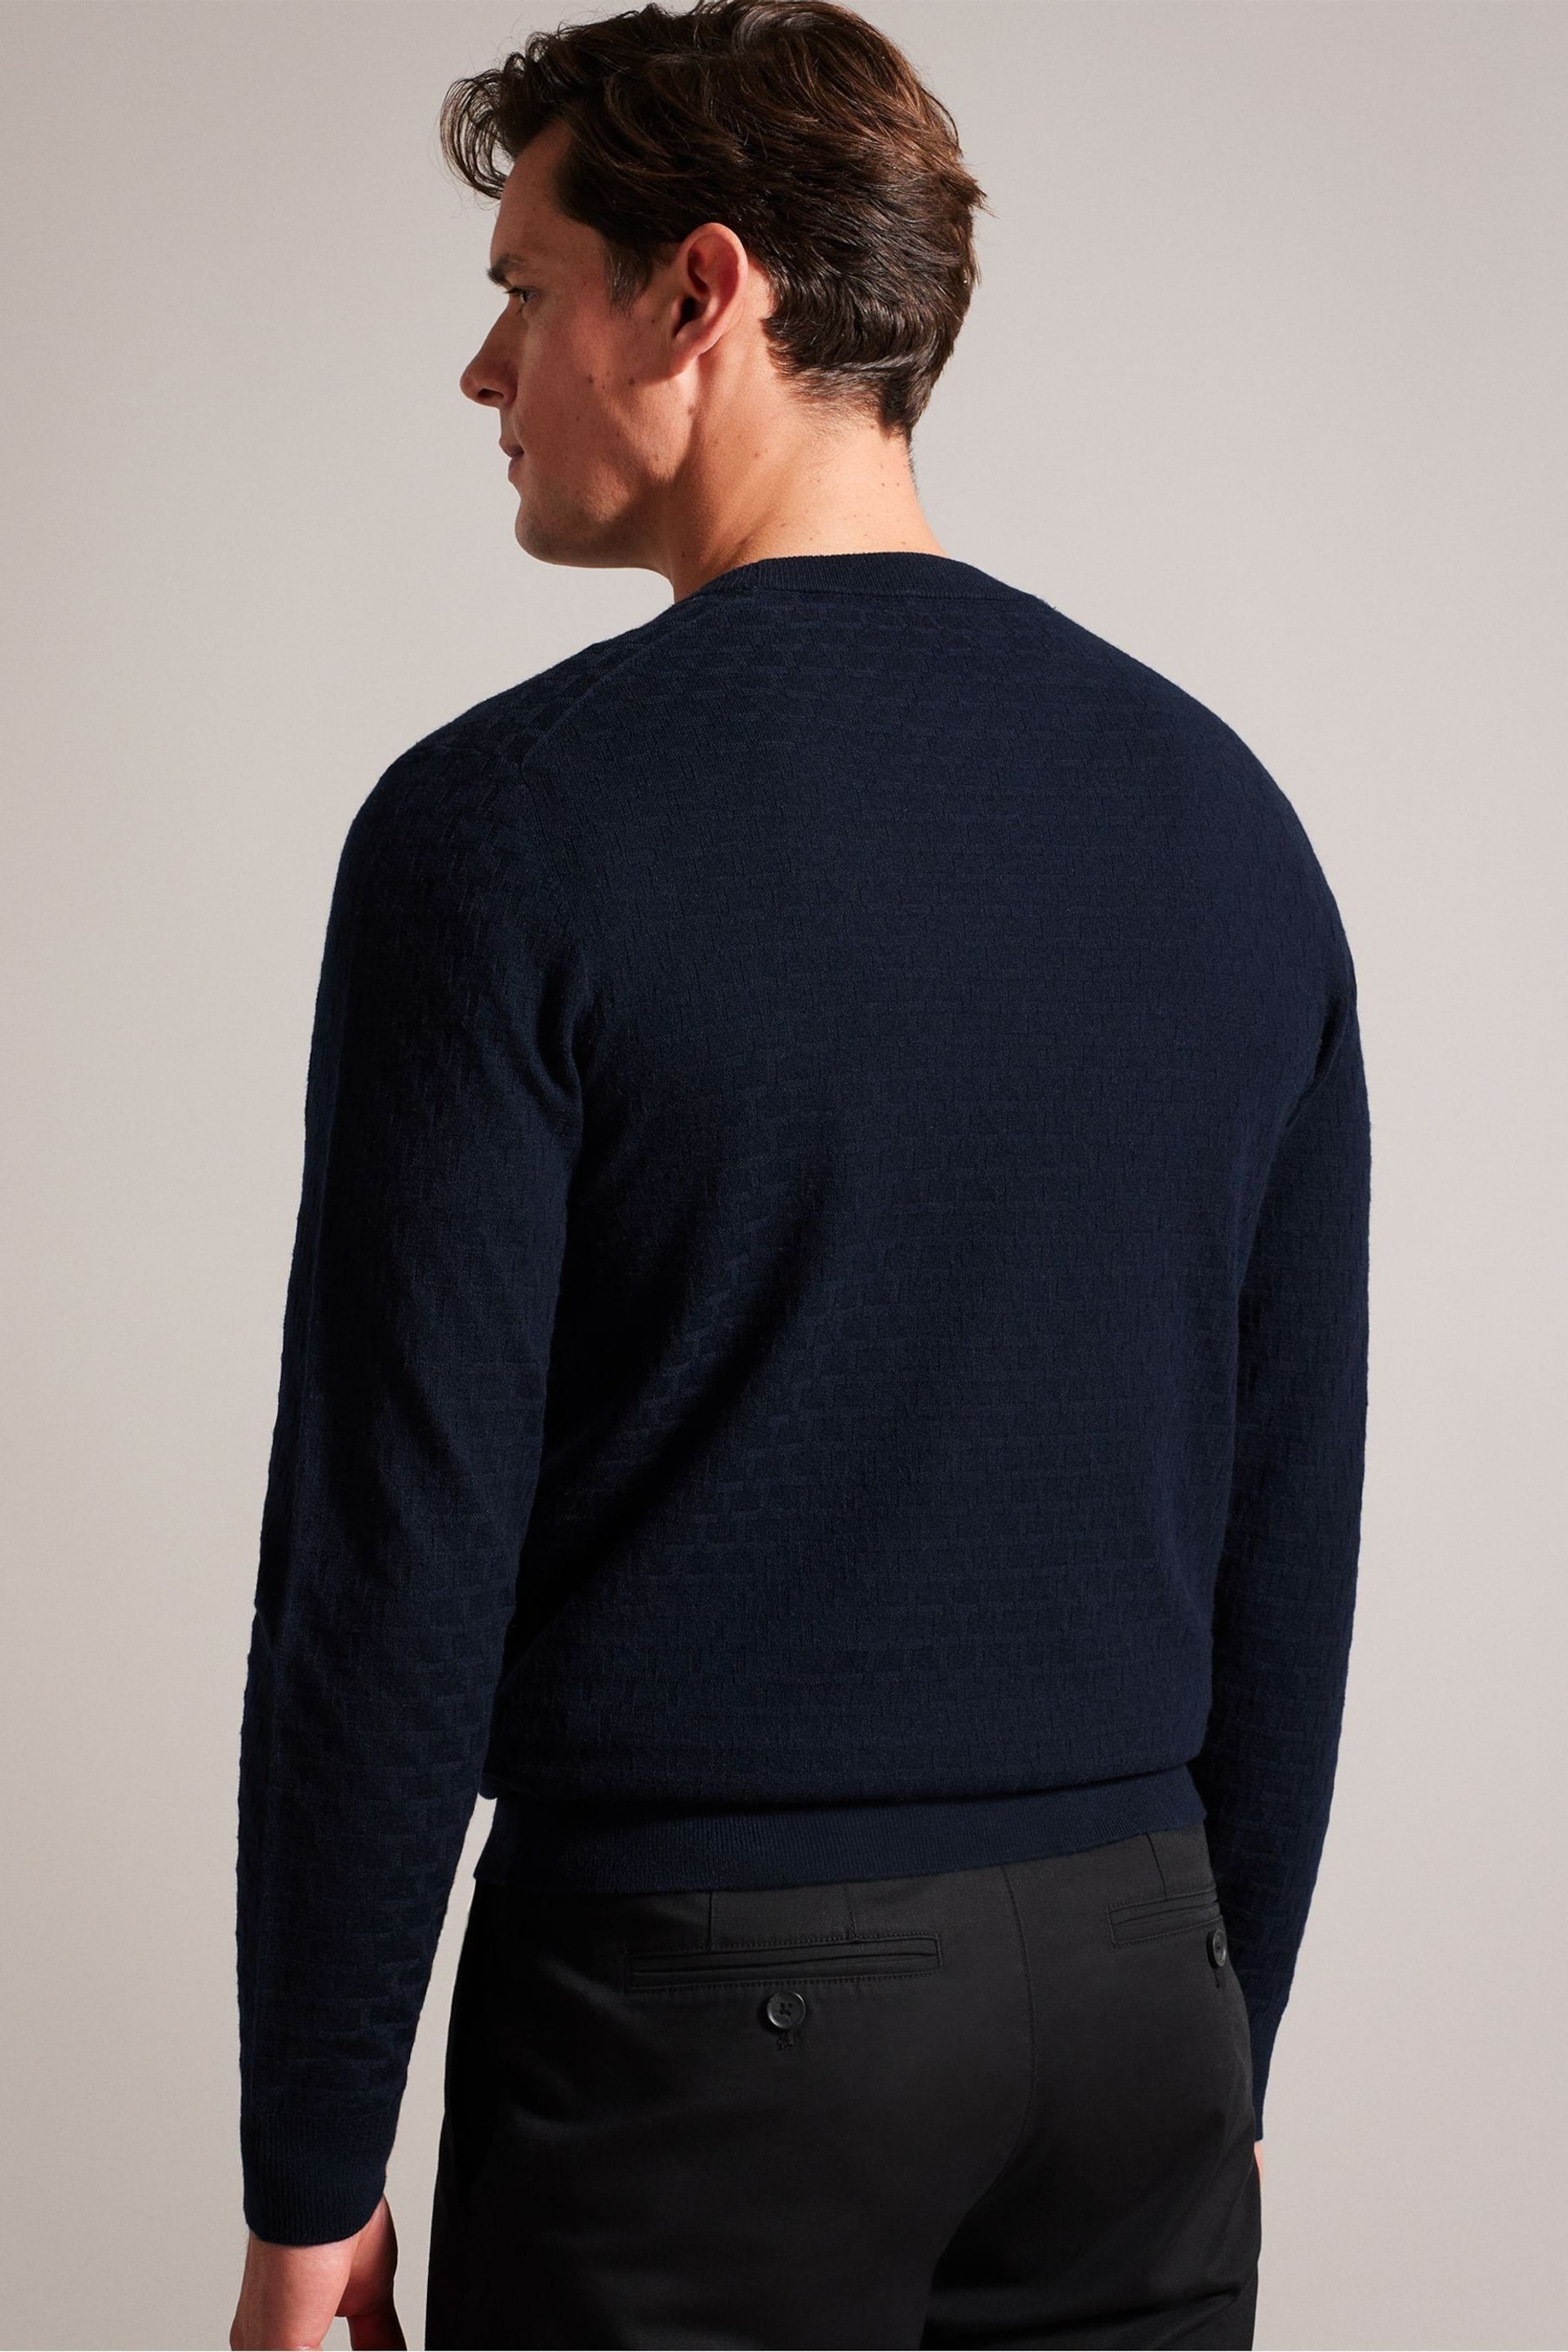 Ted Baker Blue Loung Long Sleeve T Stitch Crew Neck T-Shirt - Image 2 of 5